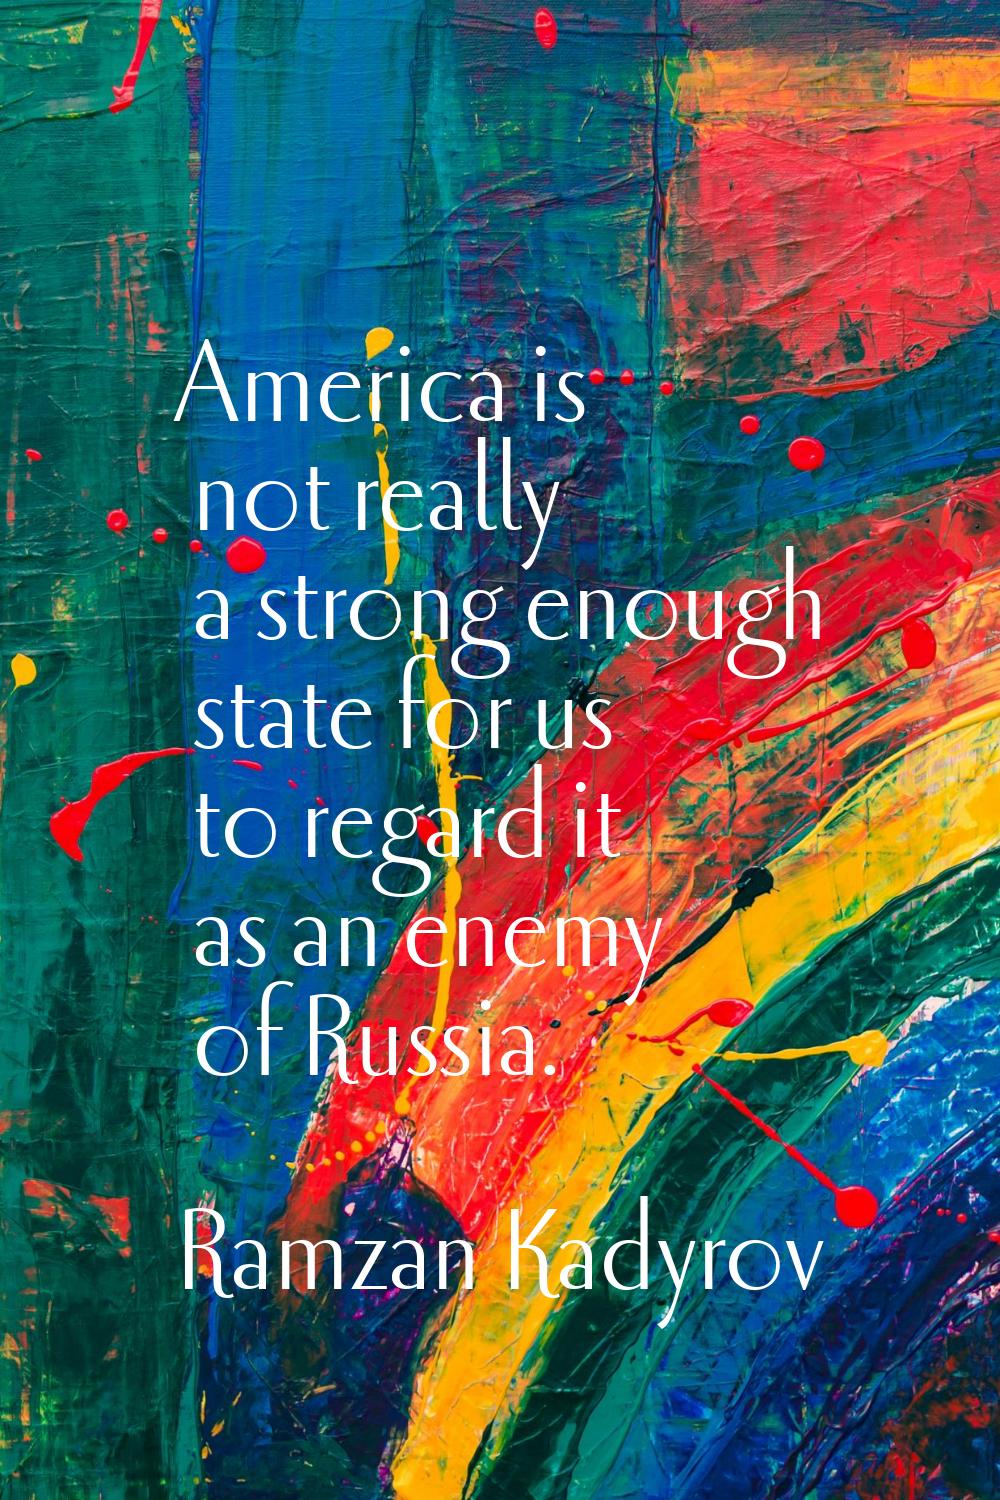 America is not really a strong enough state for us to regard it as an enemy of Russia.